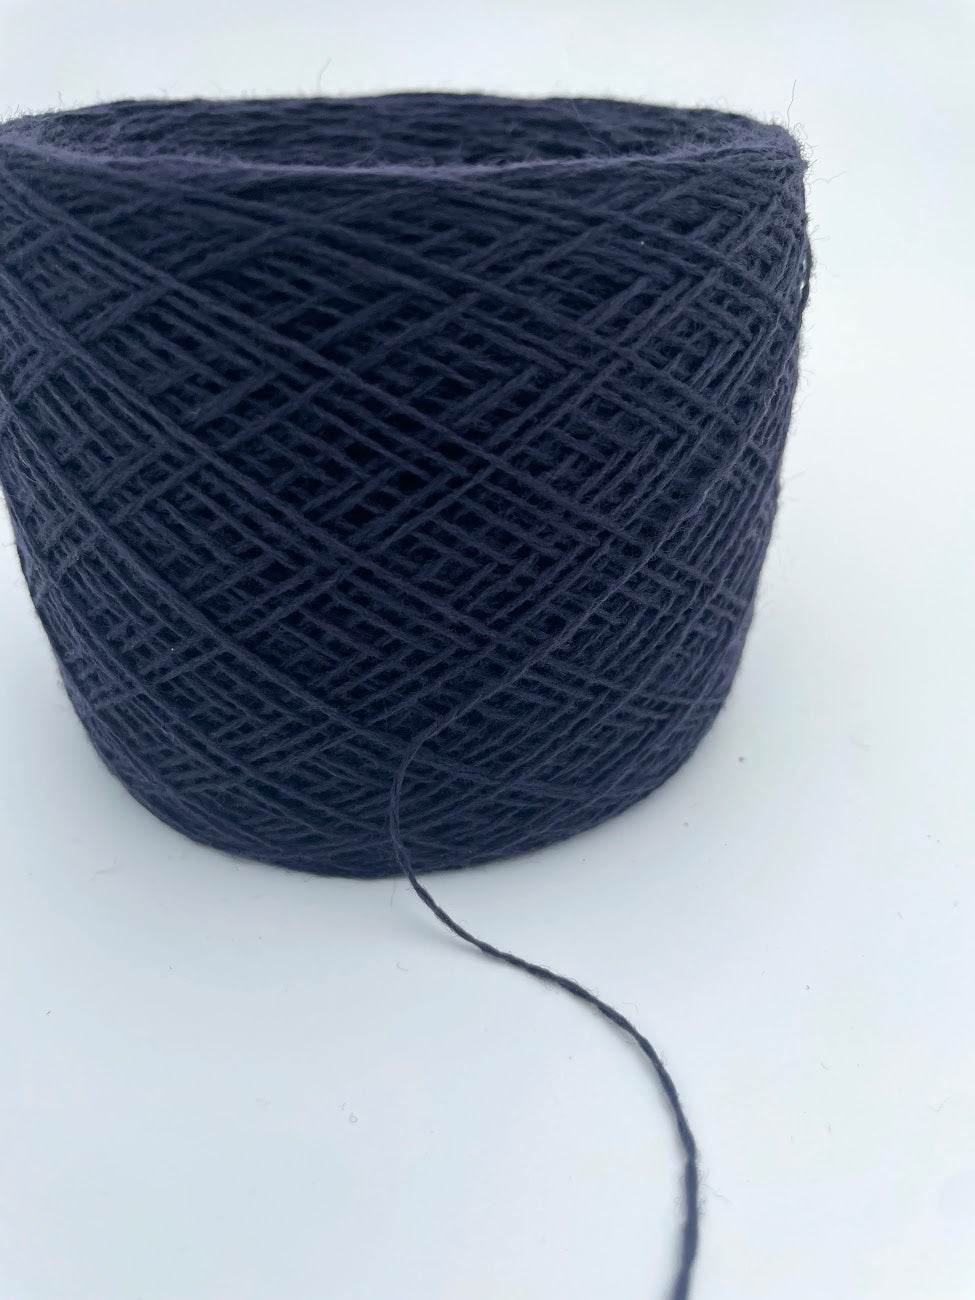 100% Cashmere Yarn - Deadstock Yarn - Made in Italy -  Navy - Lace Weight  - 100g